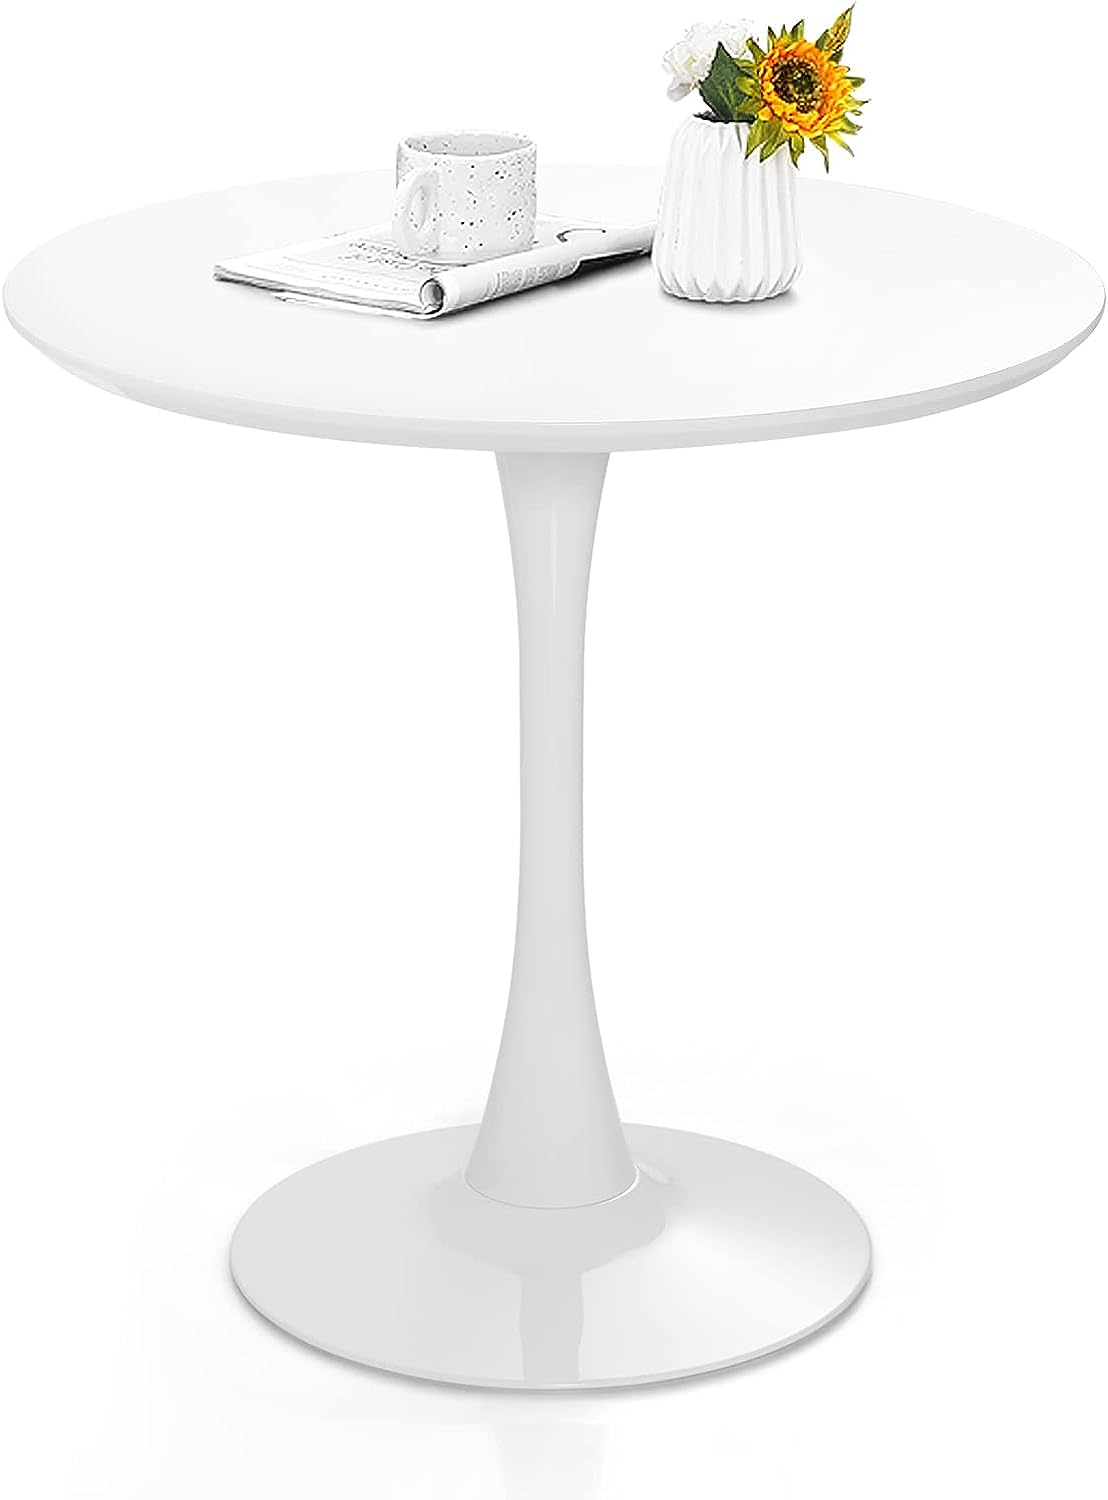 Giantex White Round Dining Table, 32 Inches Modern Tulip Kitchen Table w/ 0.9” Thickened Tabletop & Sturdy Metal Pedestal, Mid-Century Leisure Table for Small Places, Dining Room, Living Room, Cafe